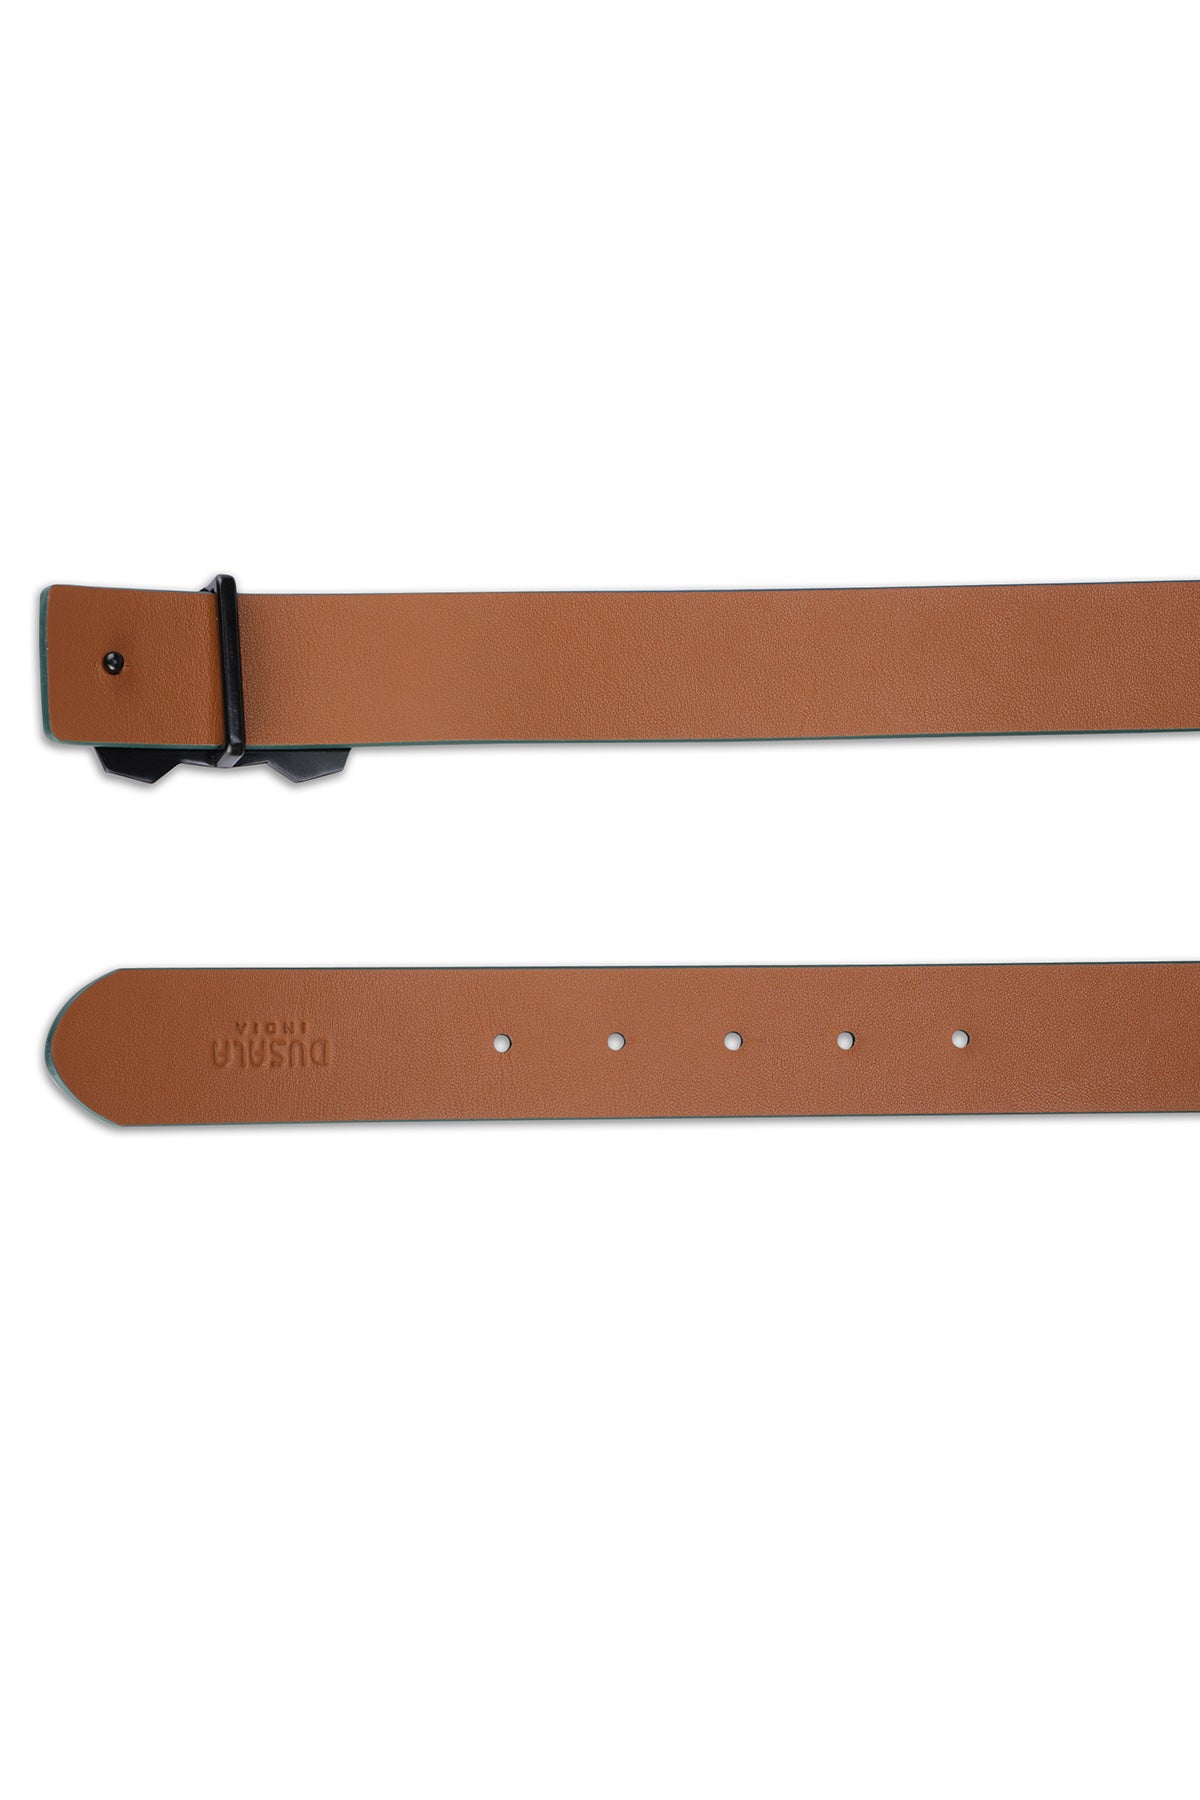 Italian Leather Ram Buckle Reversible Belt – Green and Brown